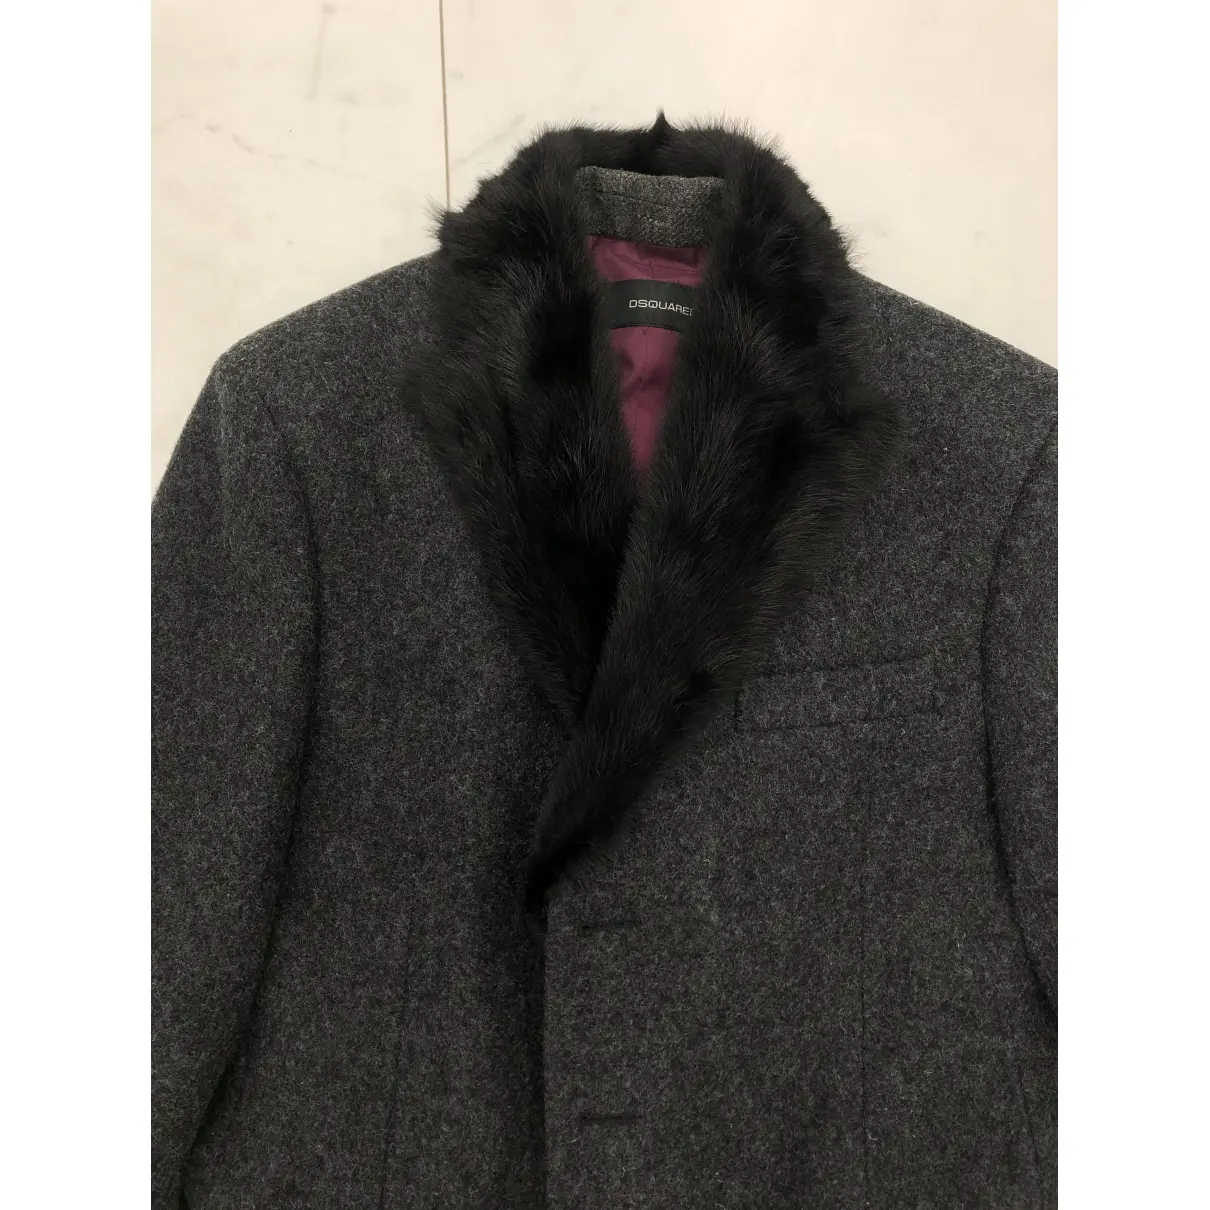 Dsquared2 Wool coat for sale